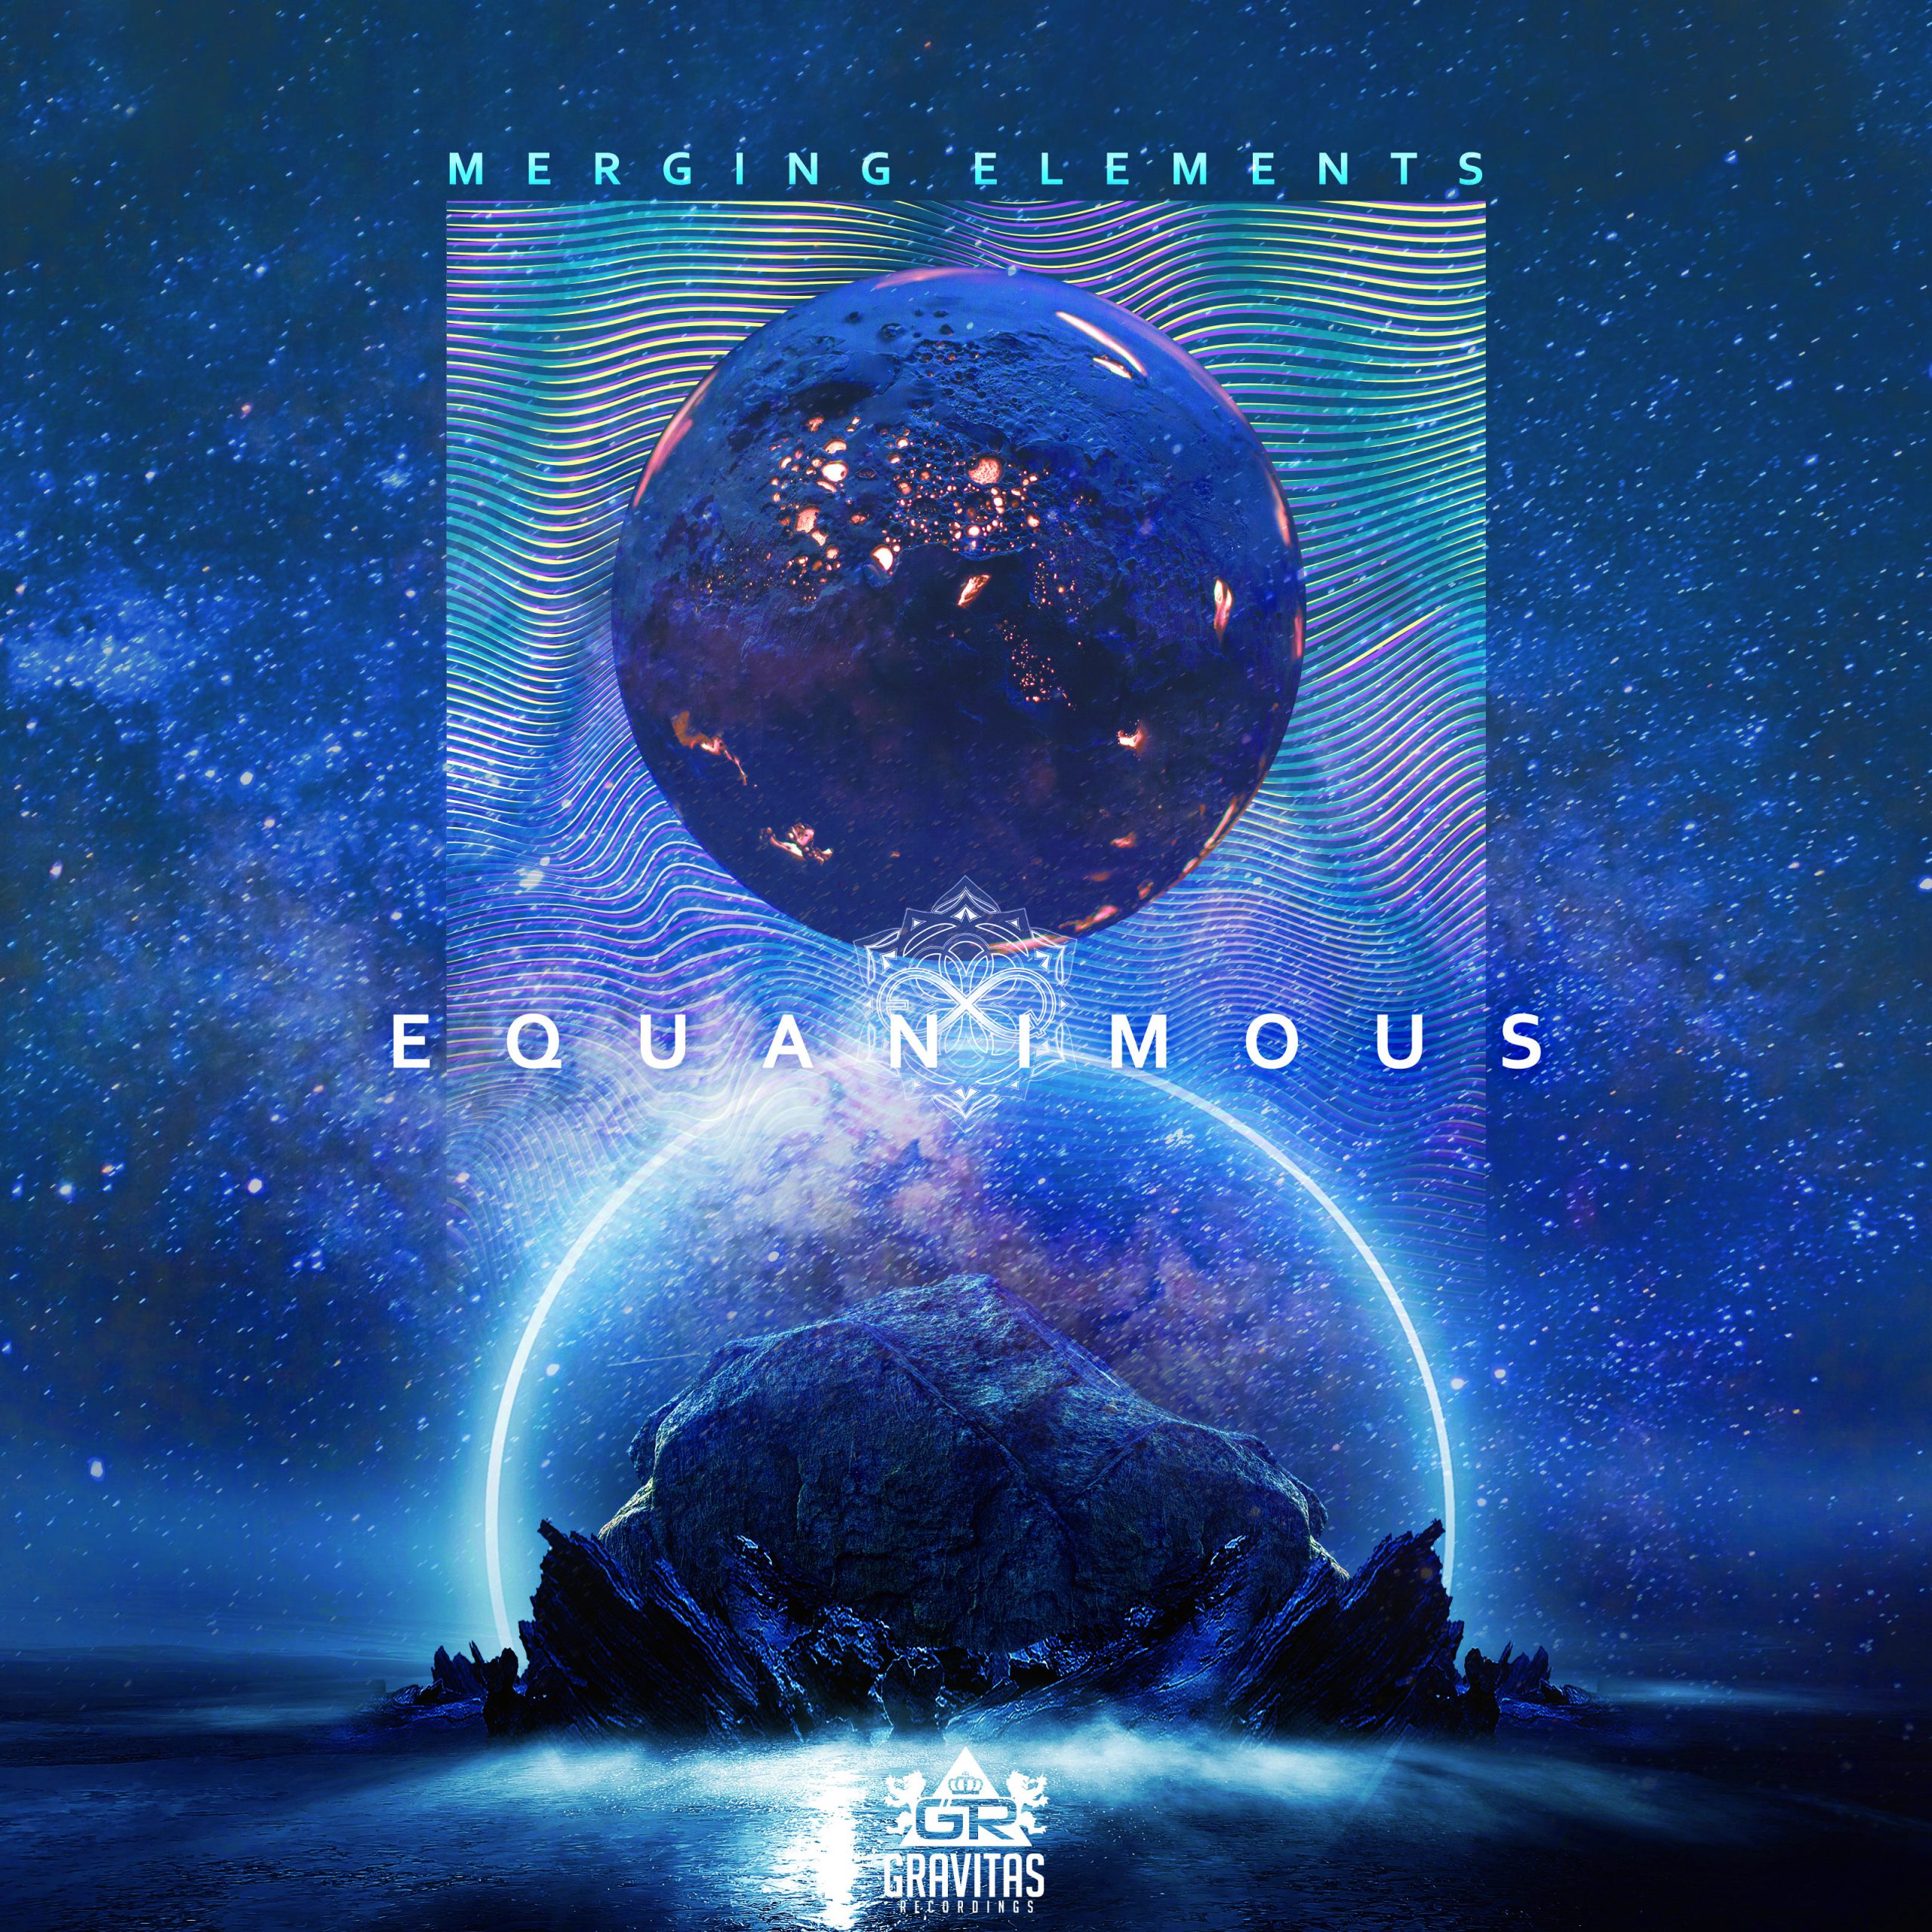 equanimous merging elements